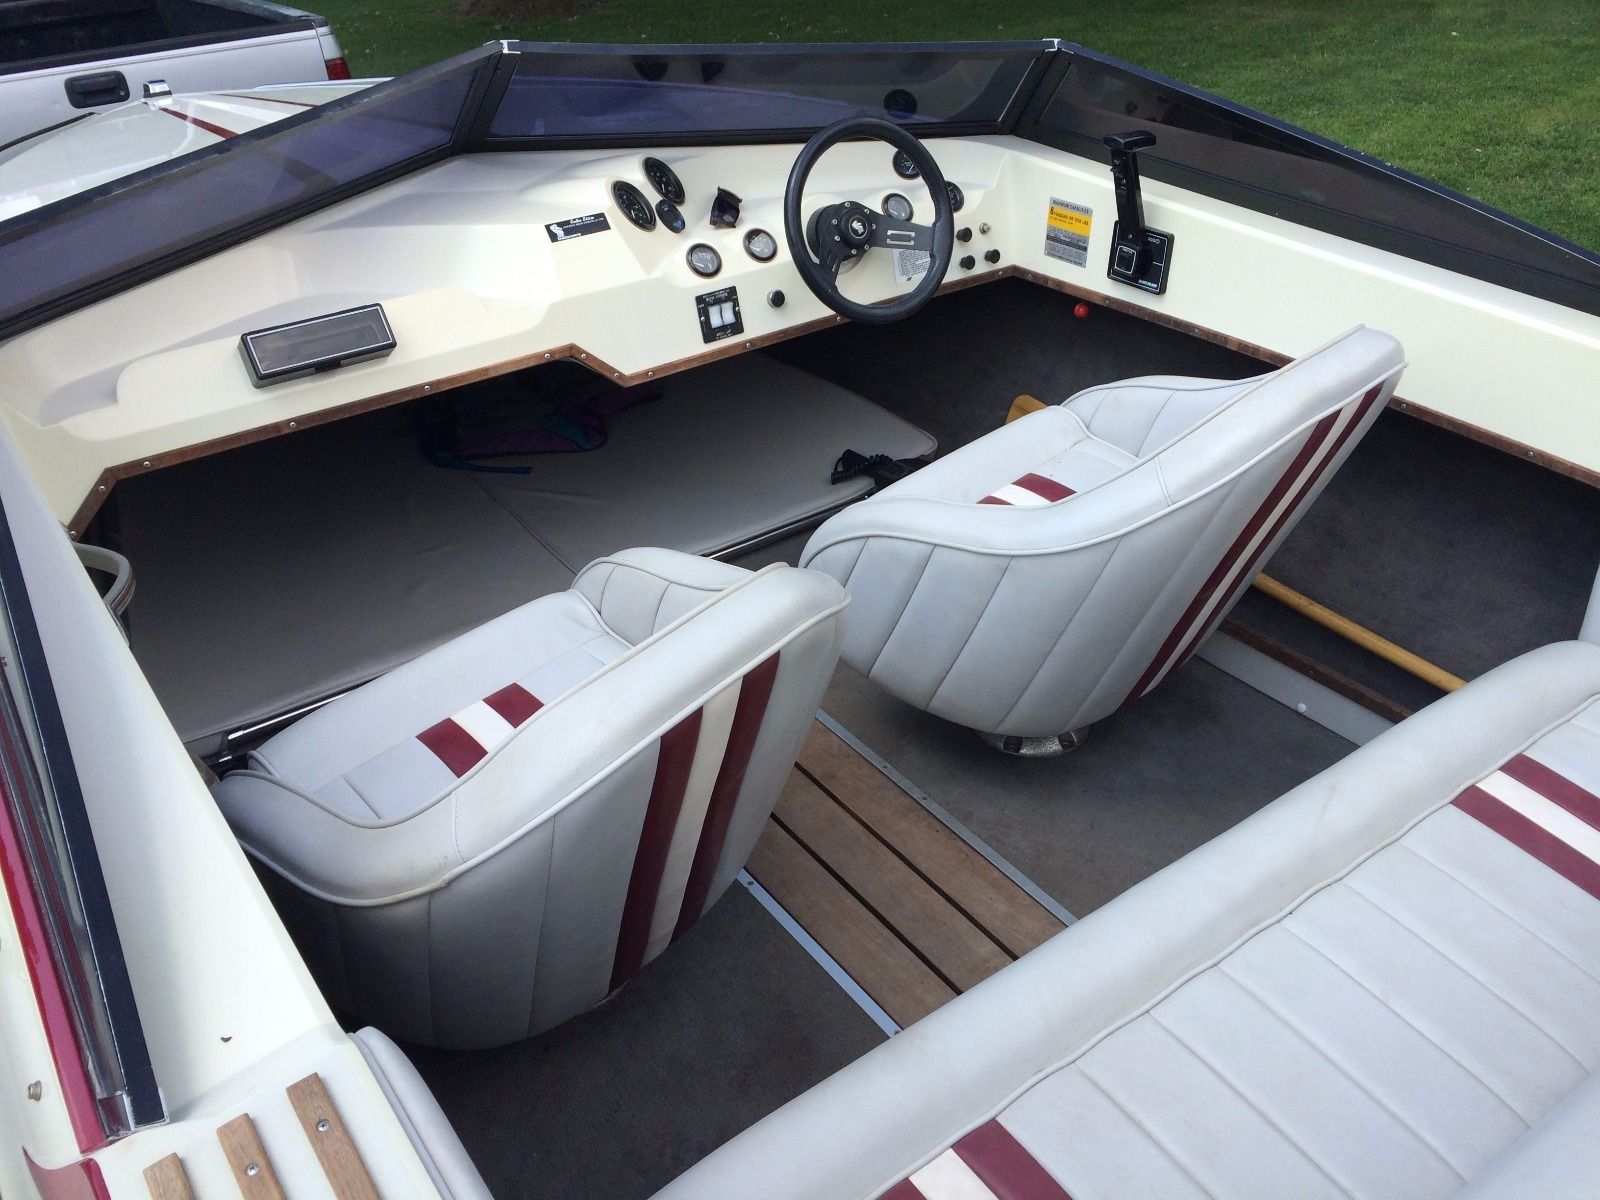 1989 20ft. checkmate boat look like